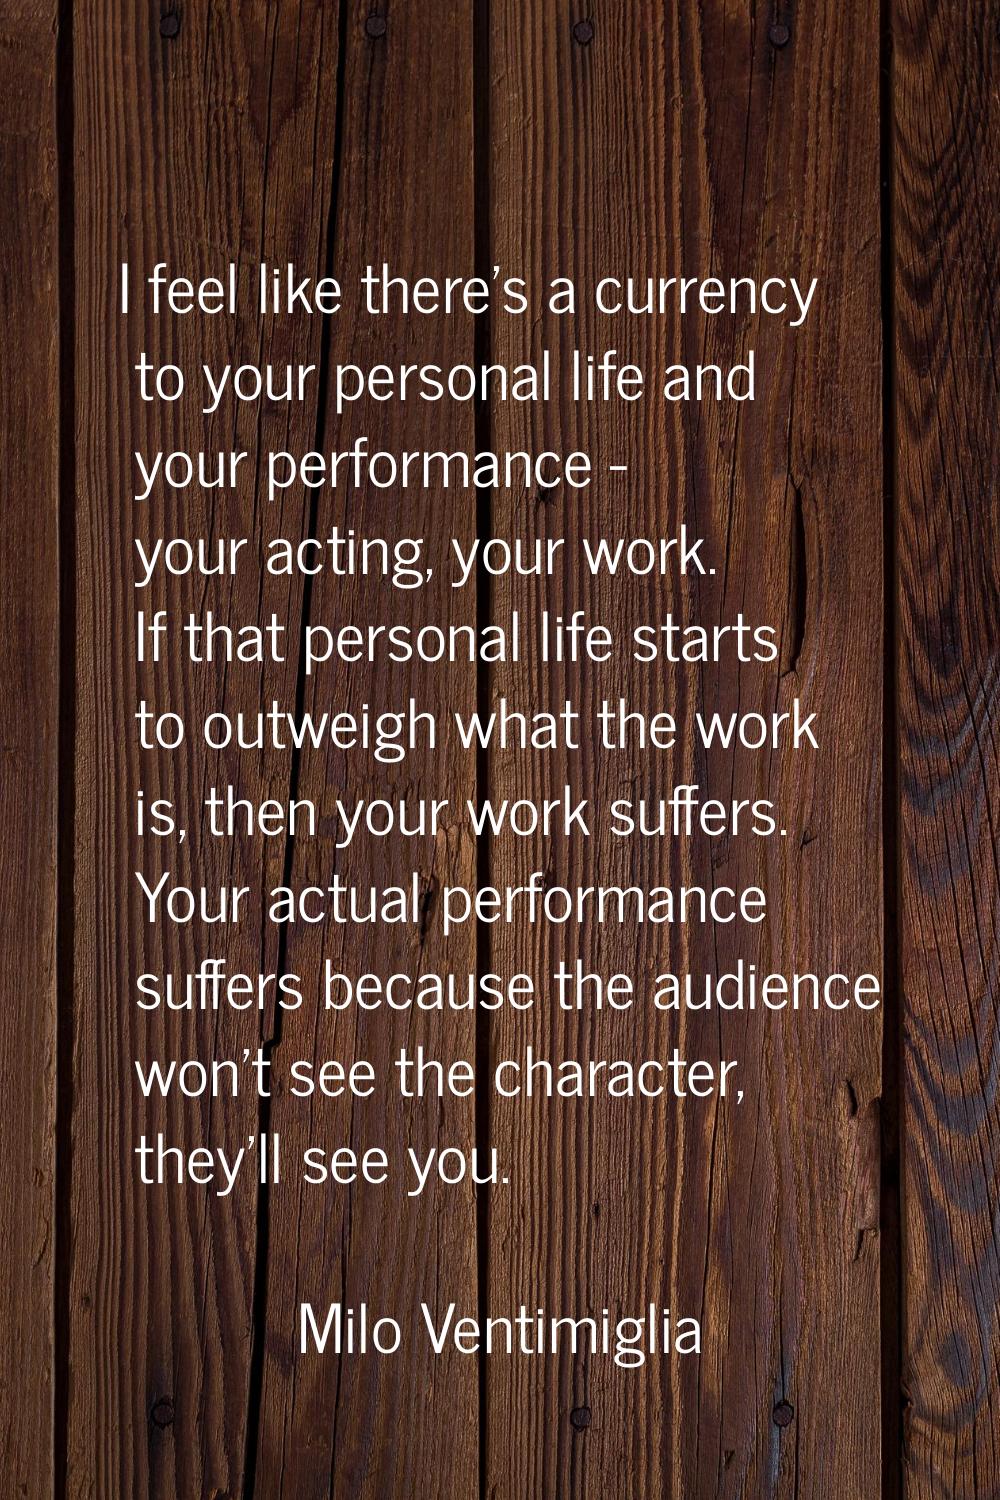 I feel like there's a currency to your personal life and your performance - your acting, your work.